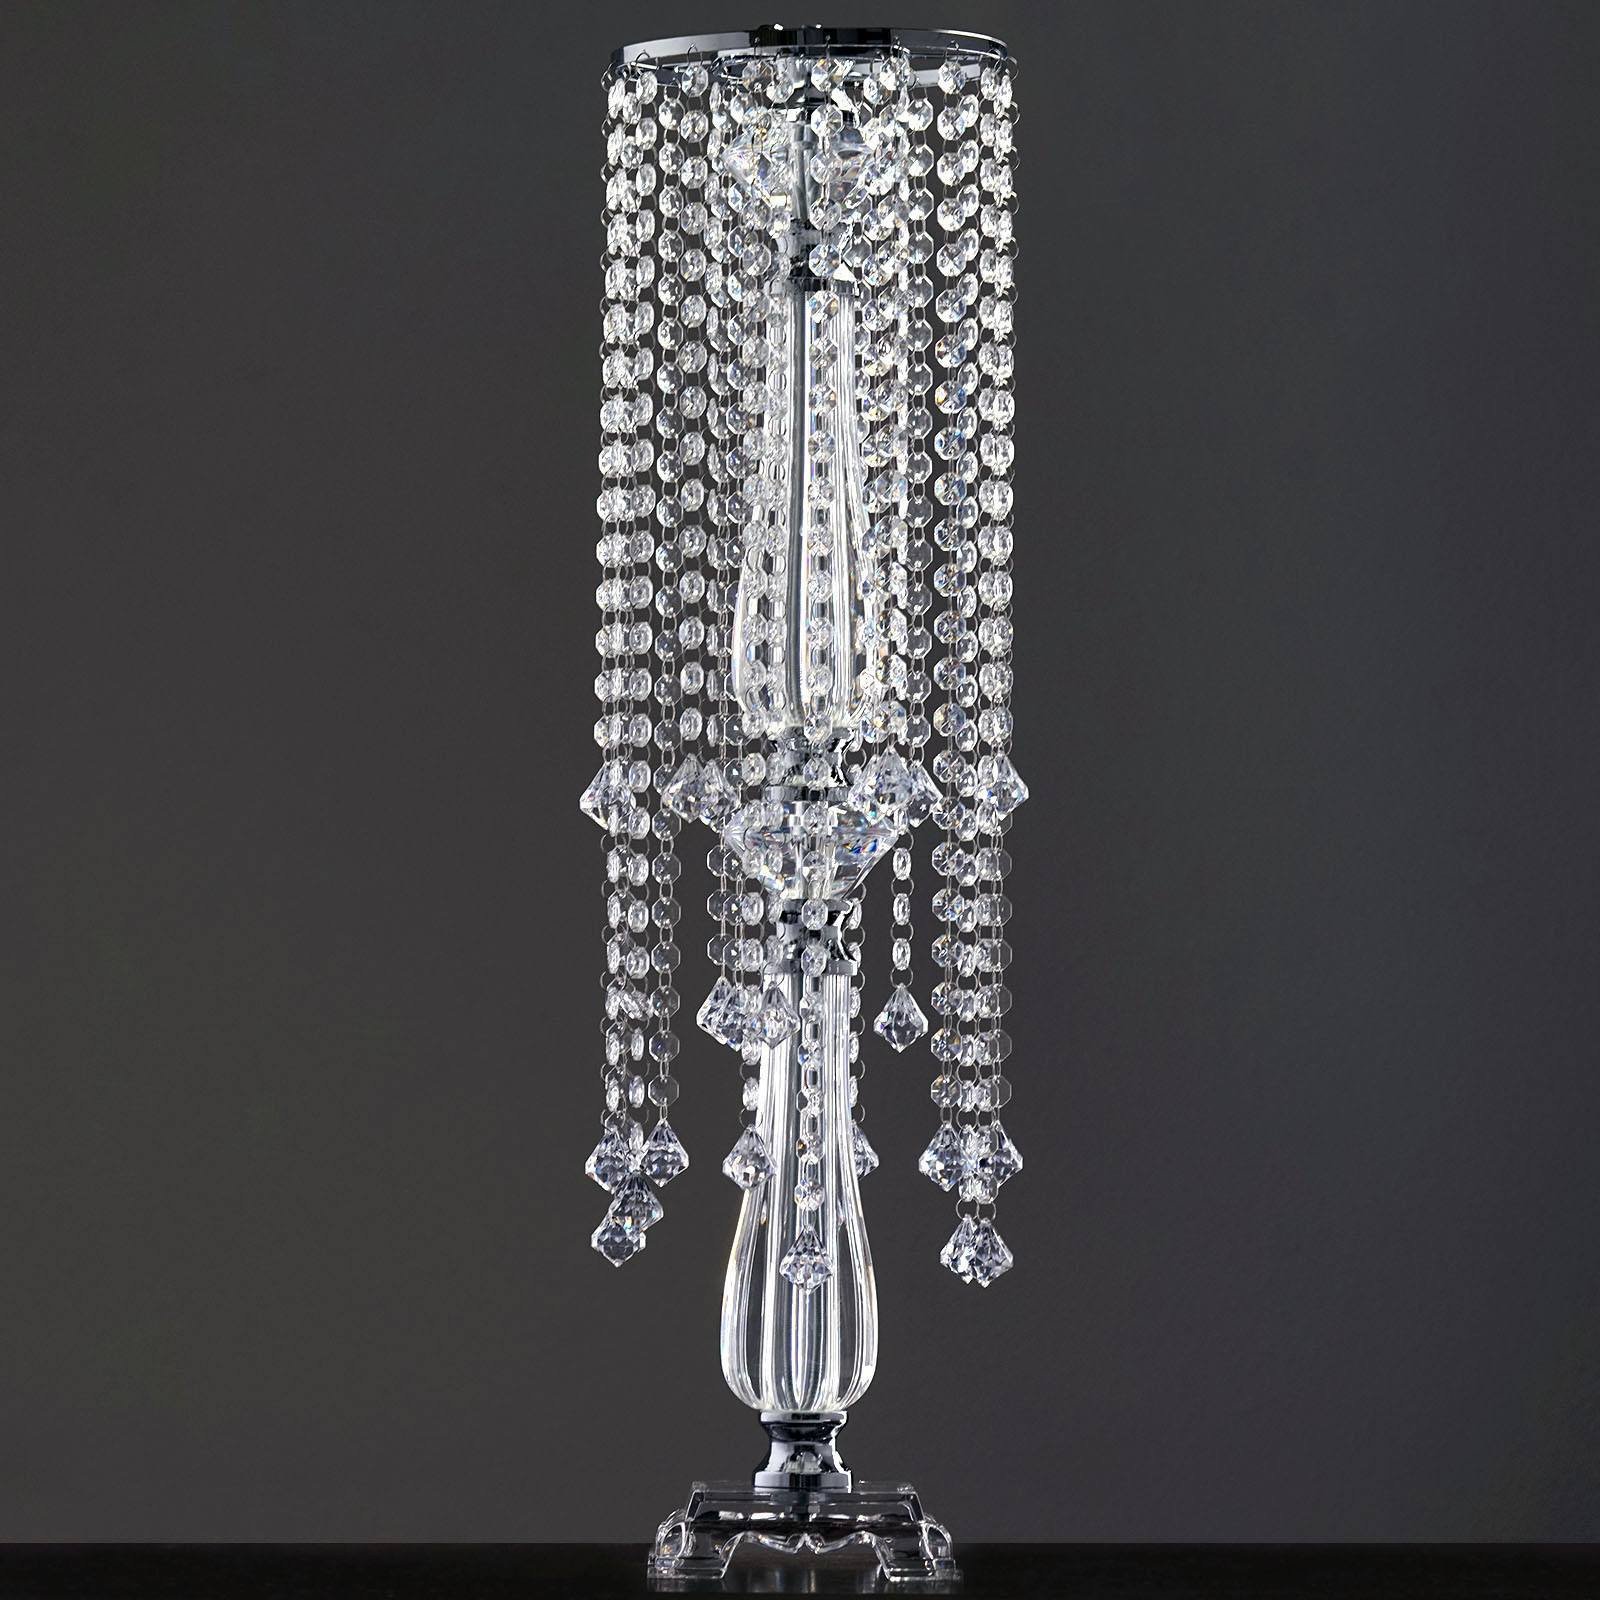 19 Hanging Crystals with Large Teardrops Diamond Crystal Chandelier ...